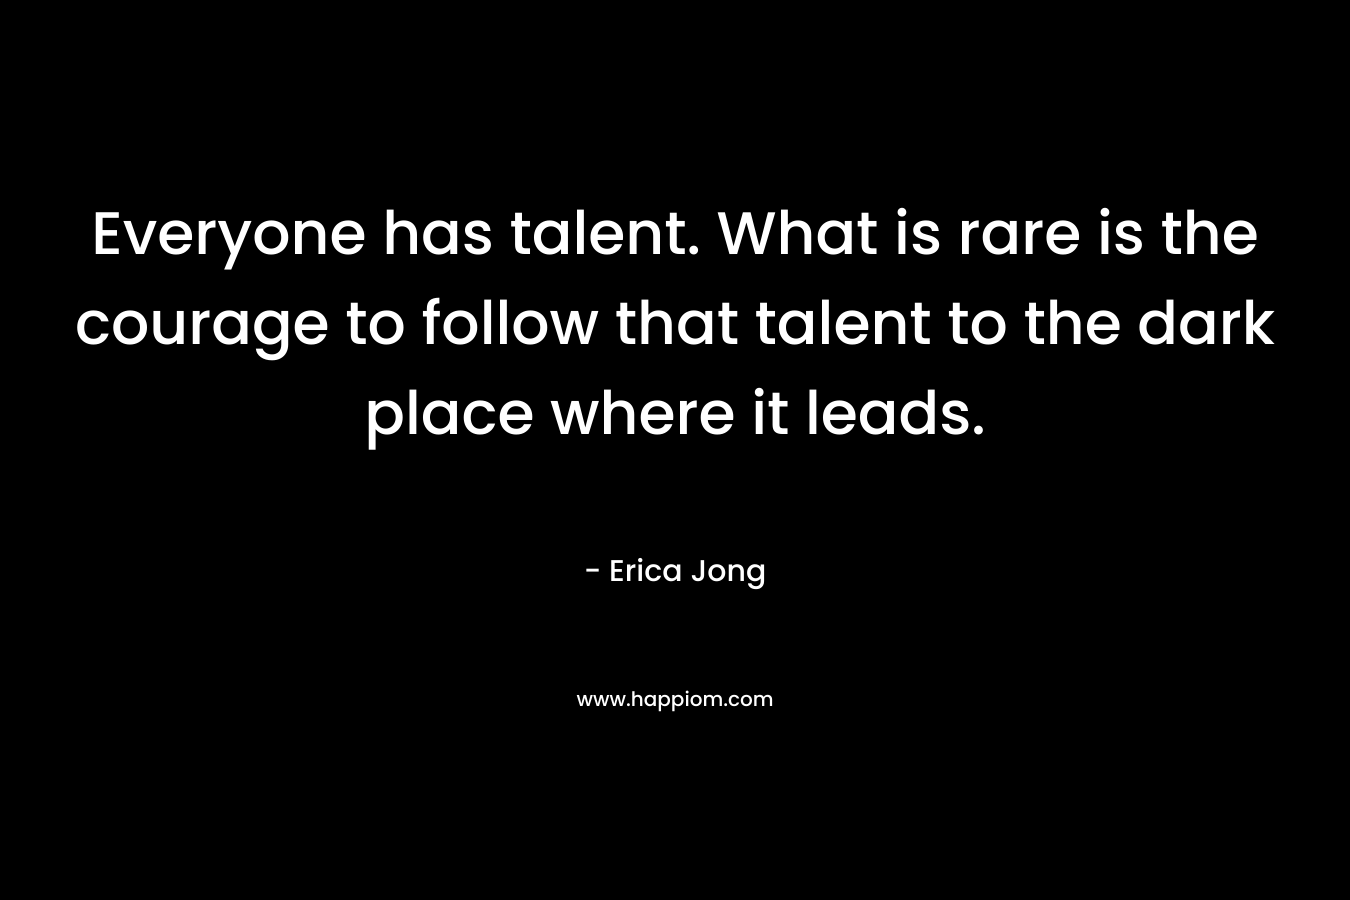 Everyone has talent. What is rare is the courage to follow that talent to the dark place where it leads.